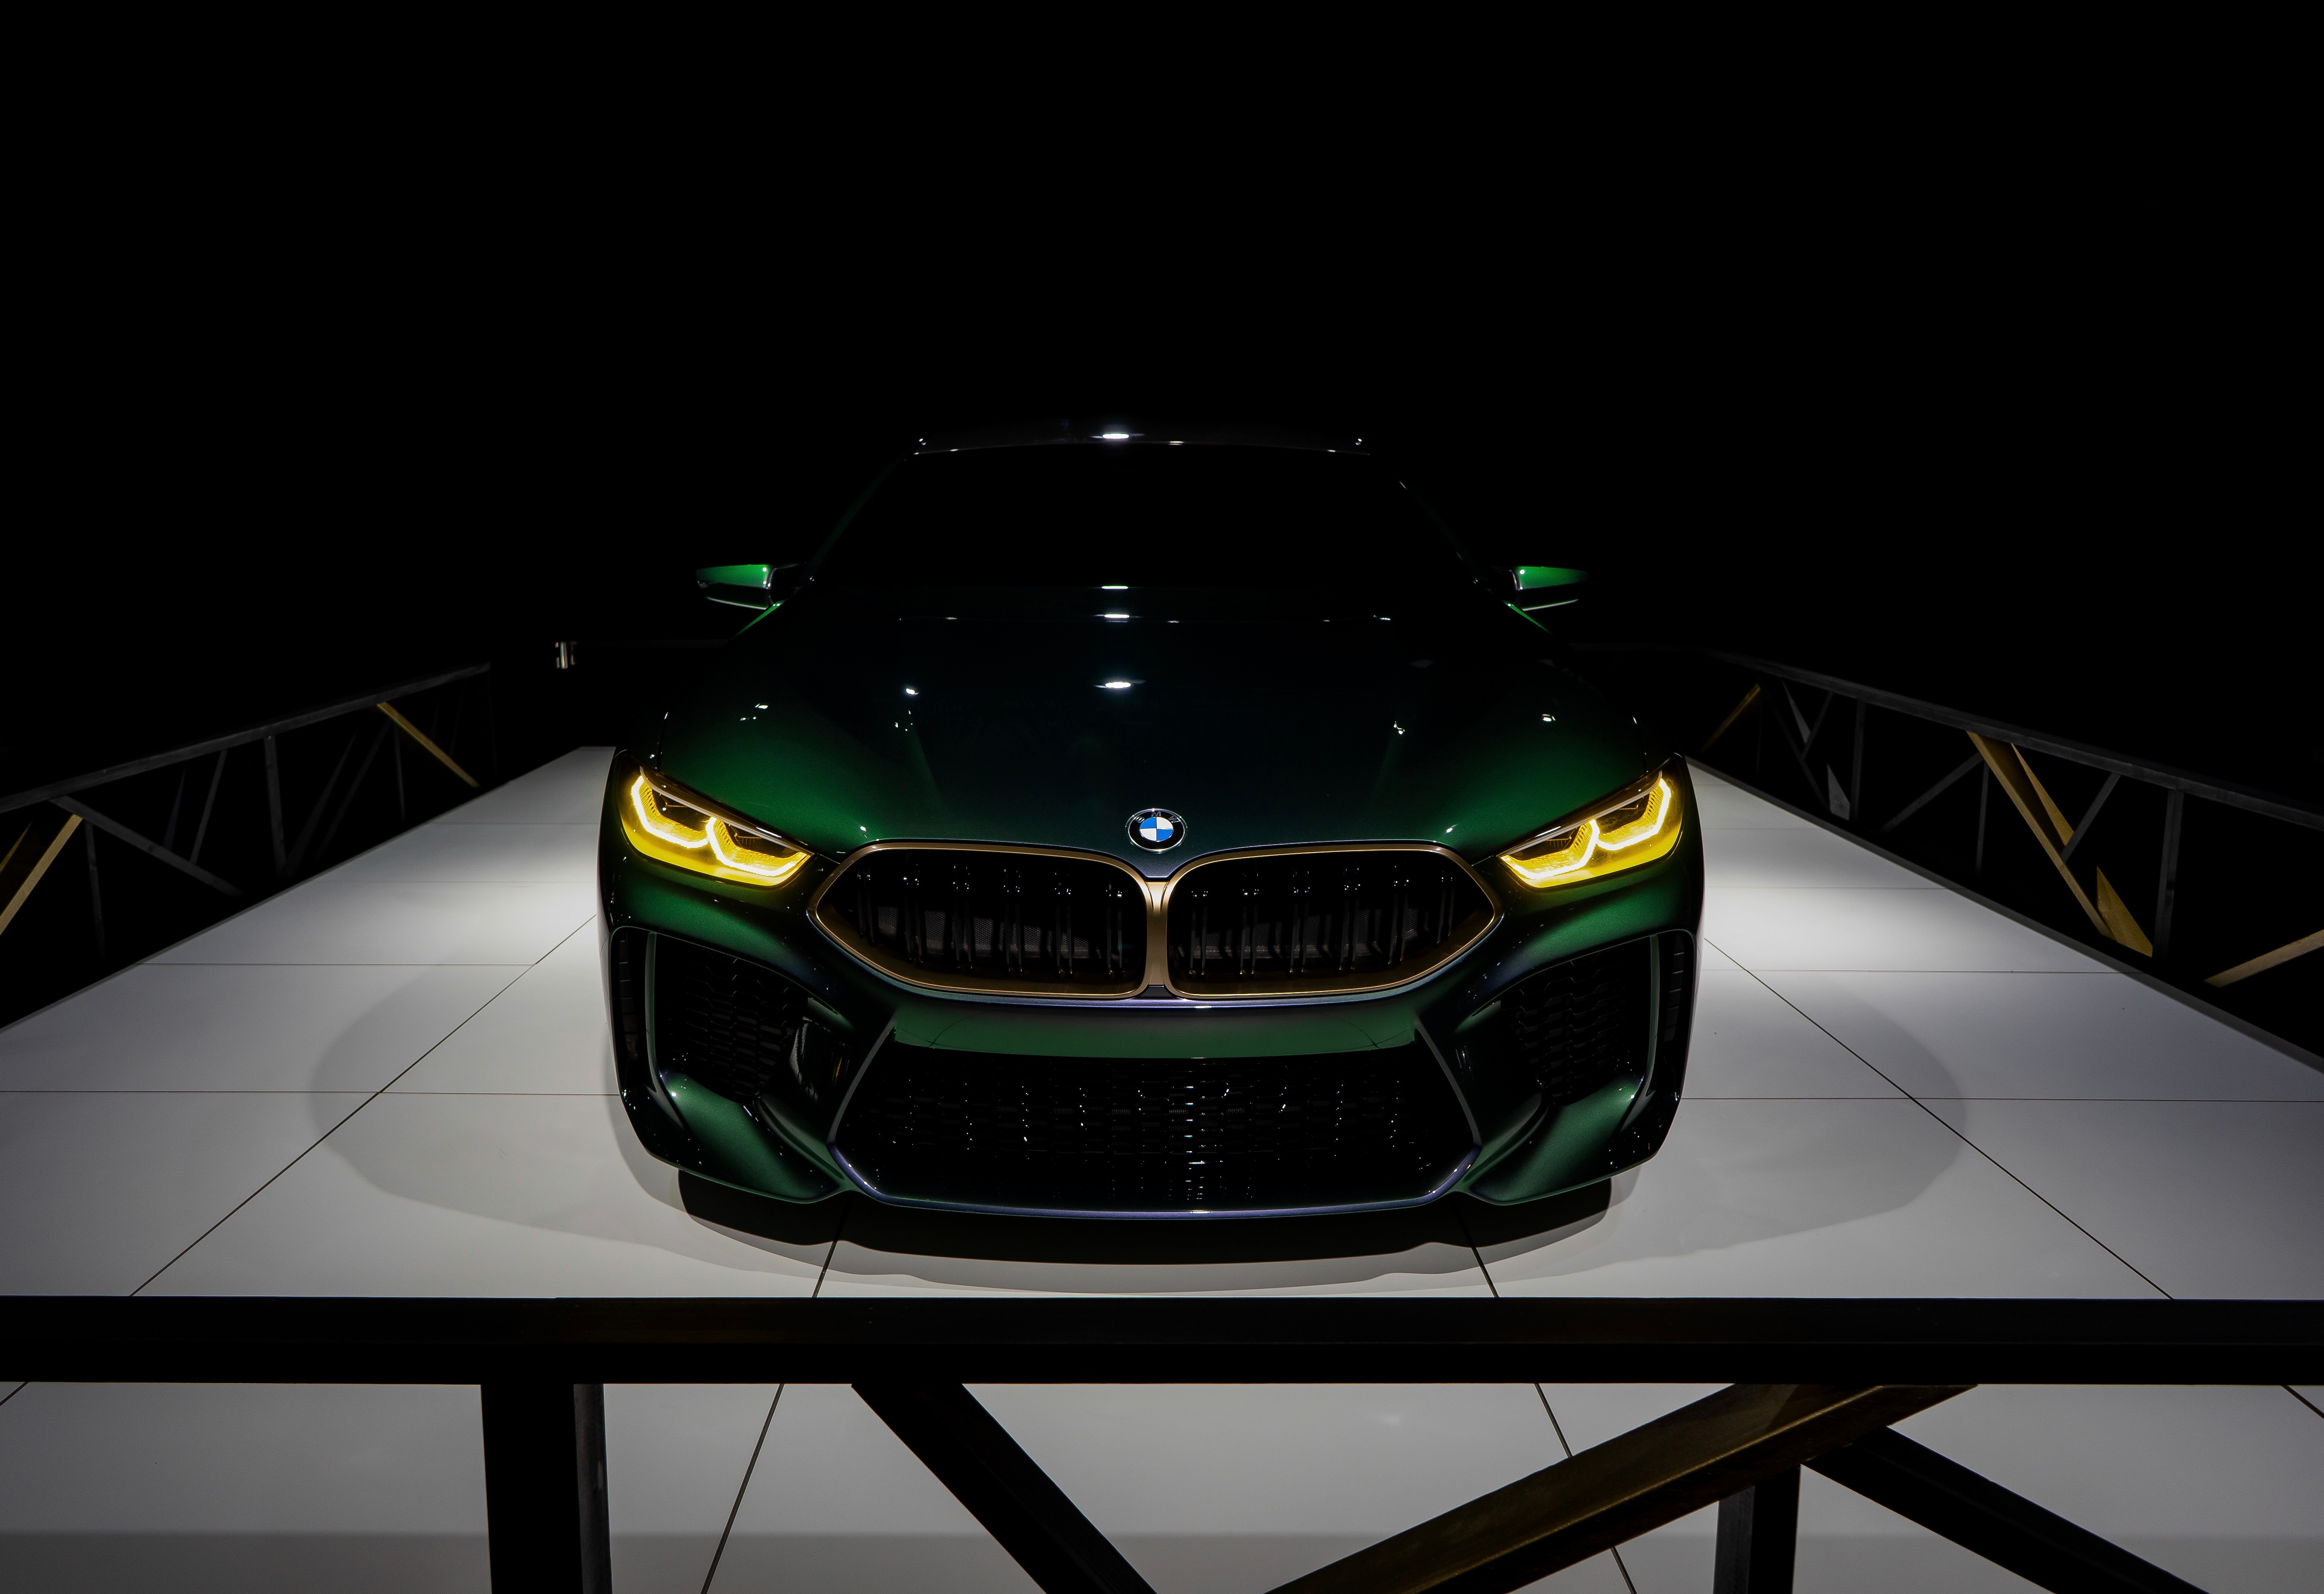 bmw, front view, cars, shadows, bumper wallpaper for mobile